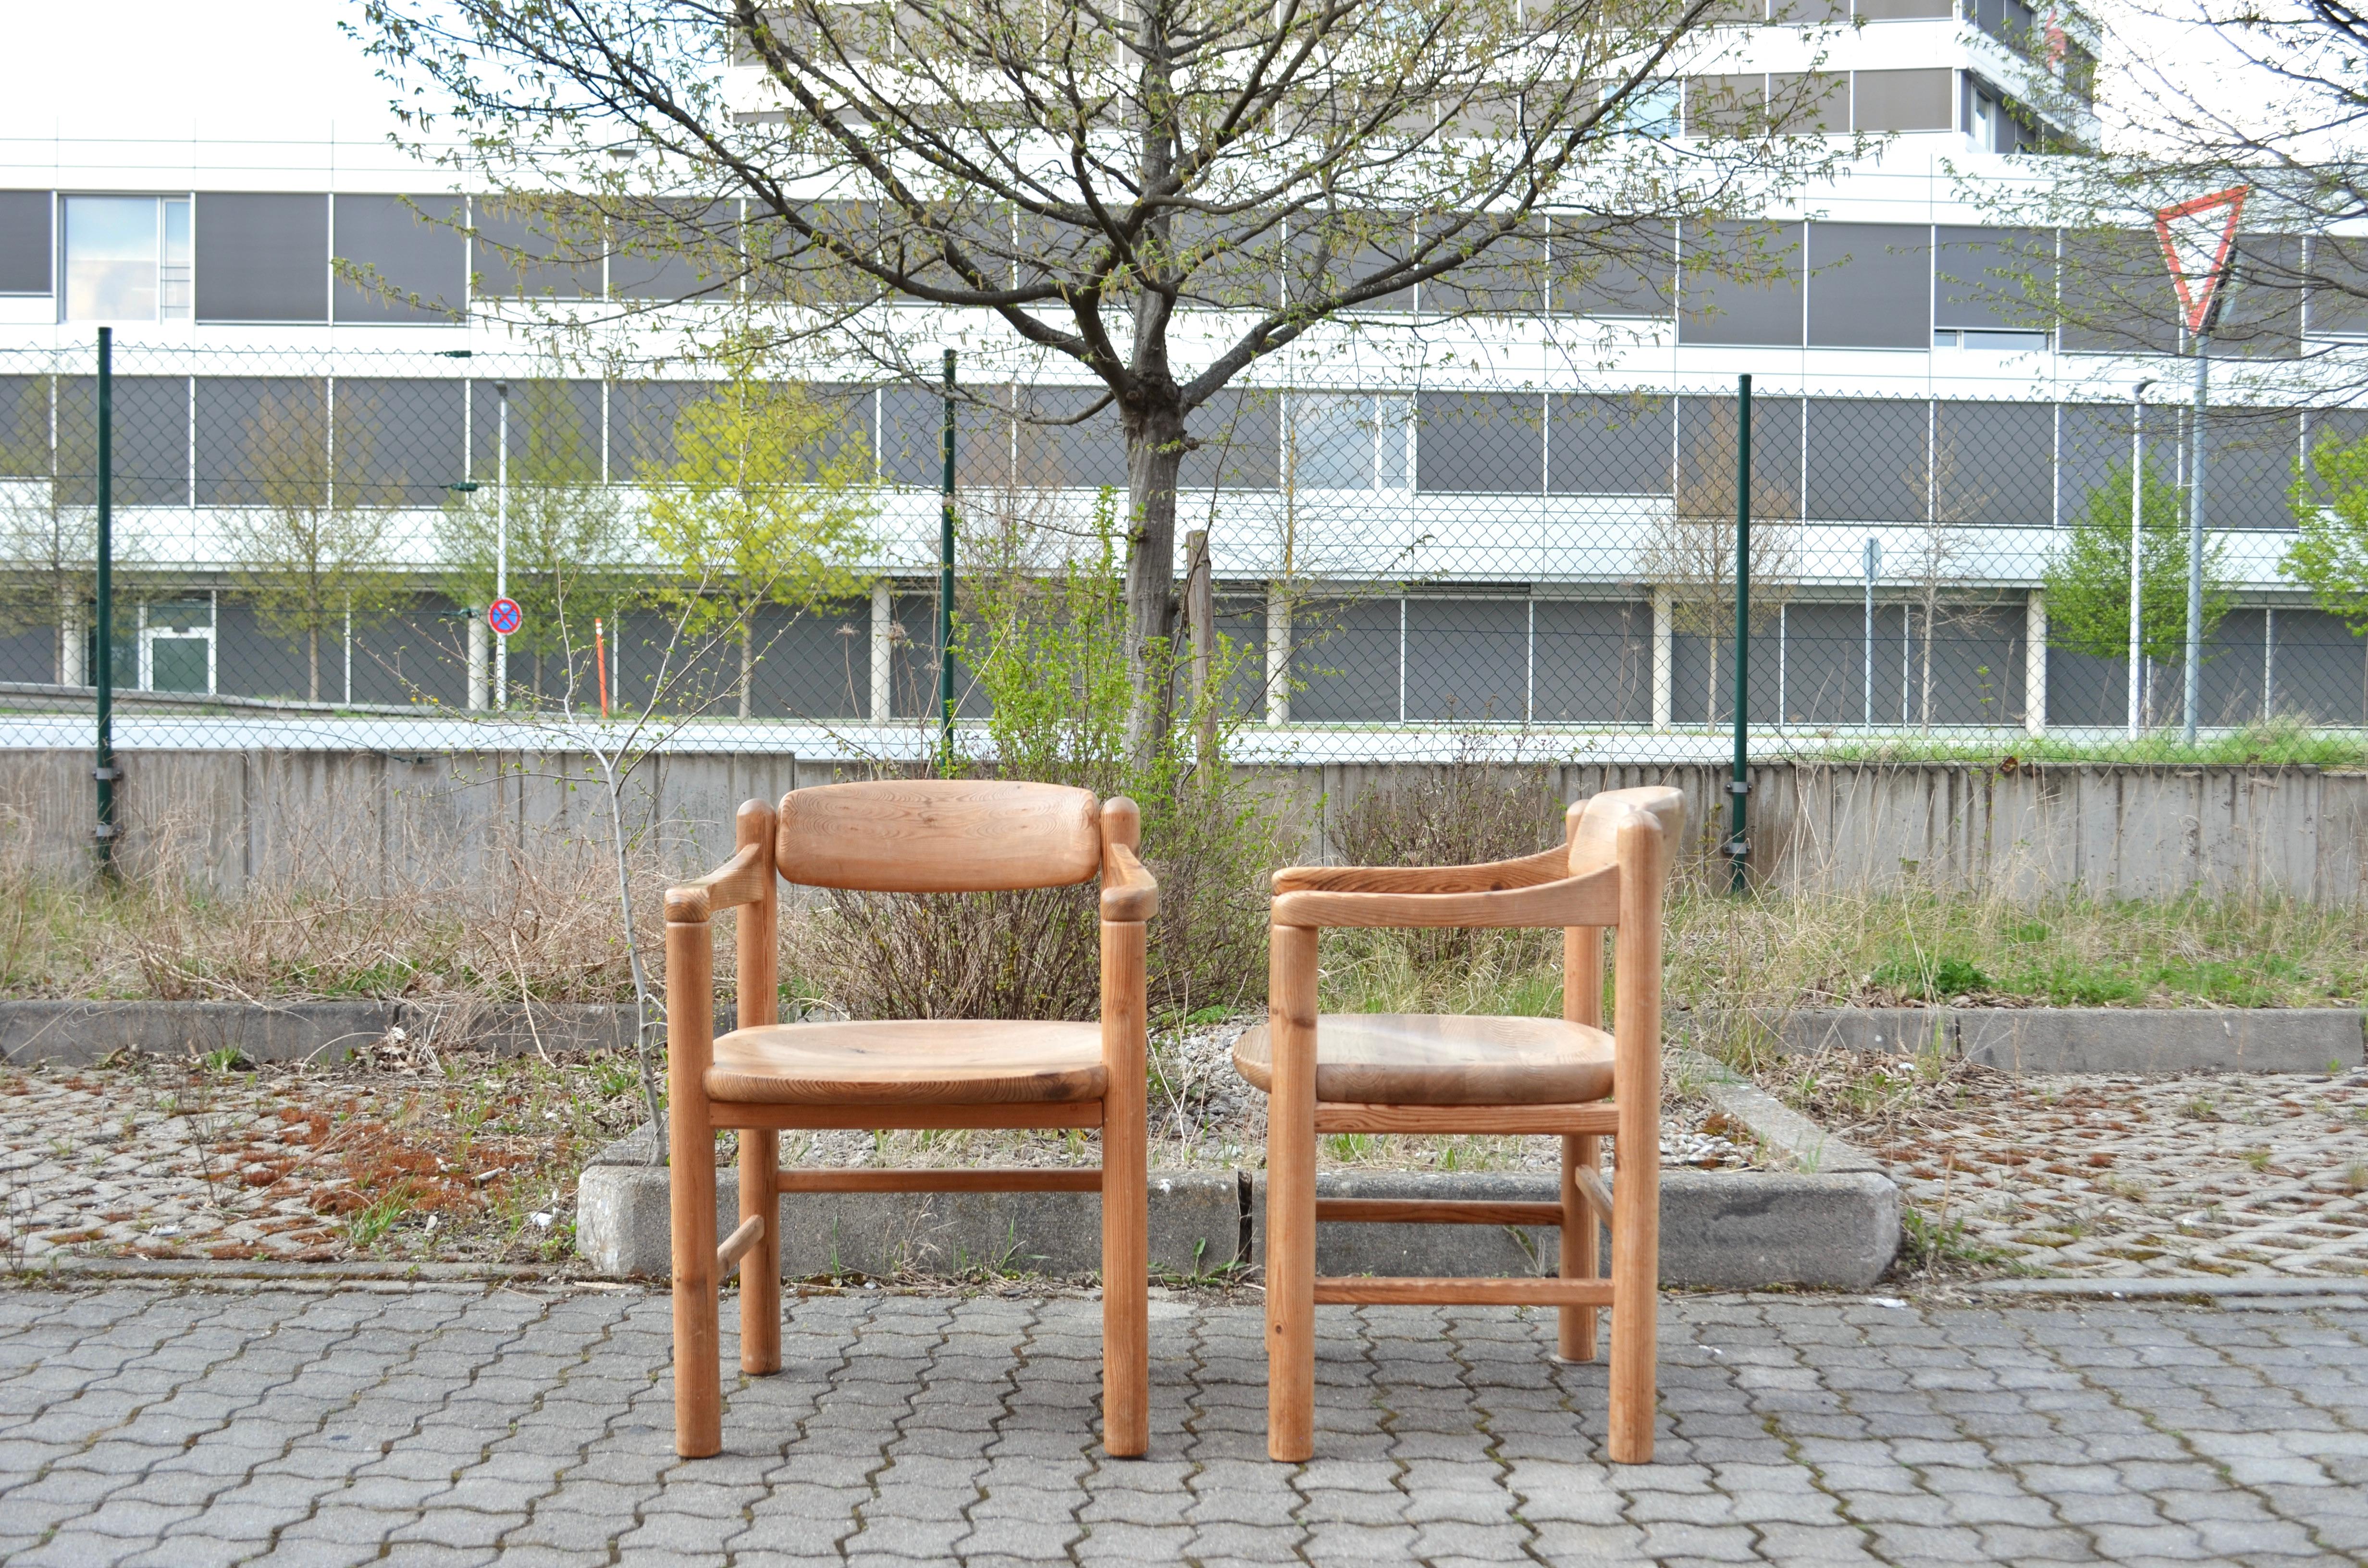 Dining chairs designed by Rainer Daumiller and manufactured by Hirtshals Savvaerk.
Rare Model with slightly curved armrests.
Solid scandinavian pine wood which is beautiful patinated.
These chairs are very comfortable.
The seating area is